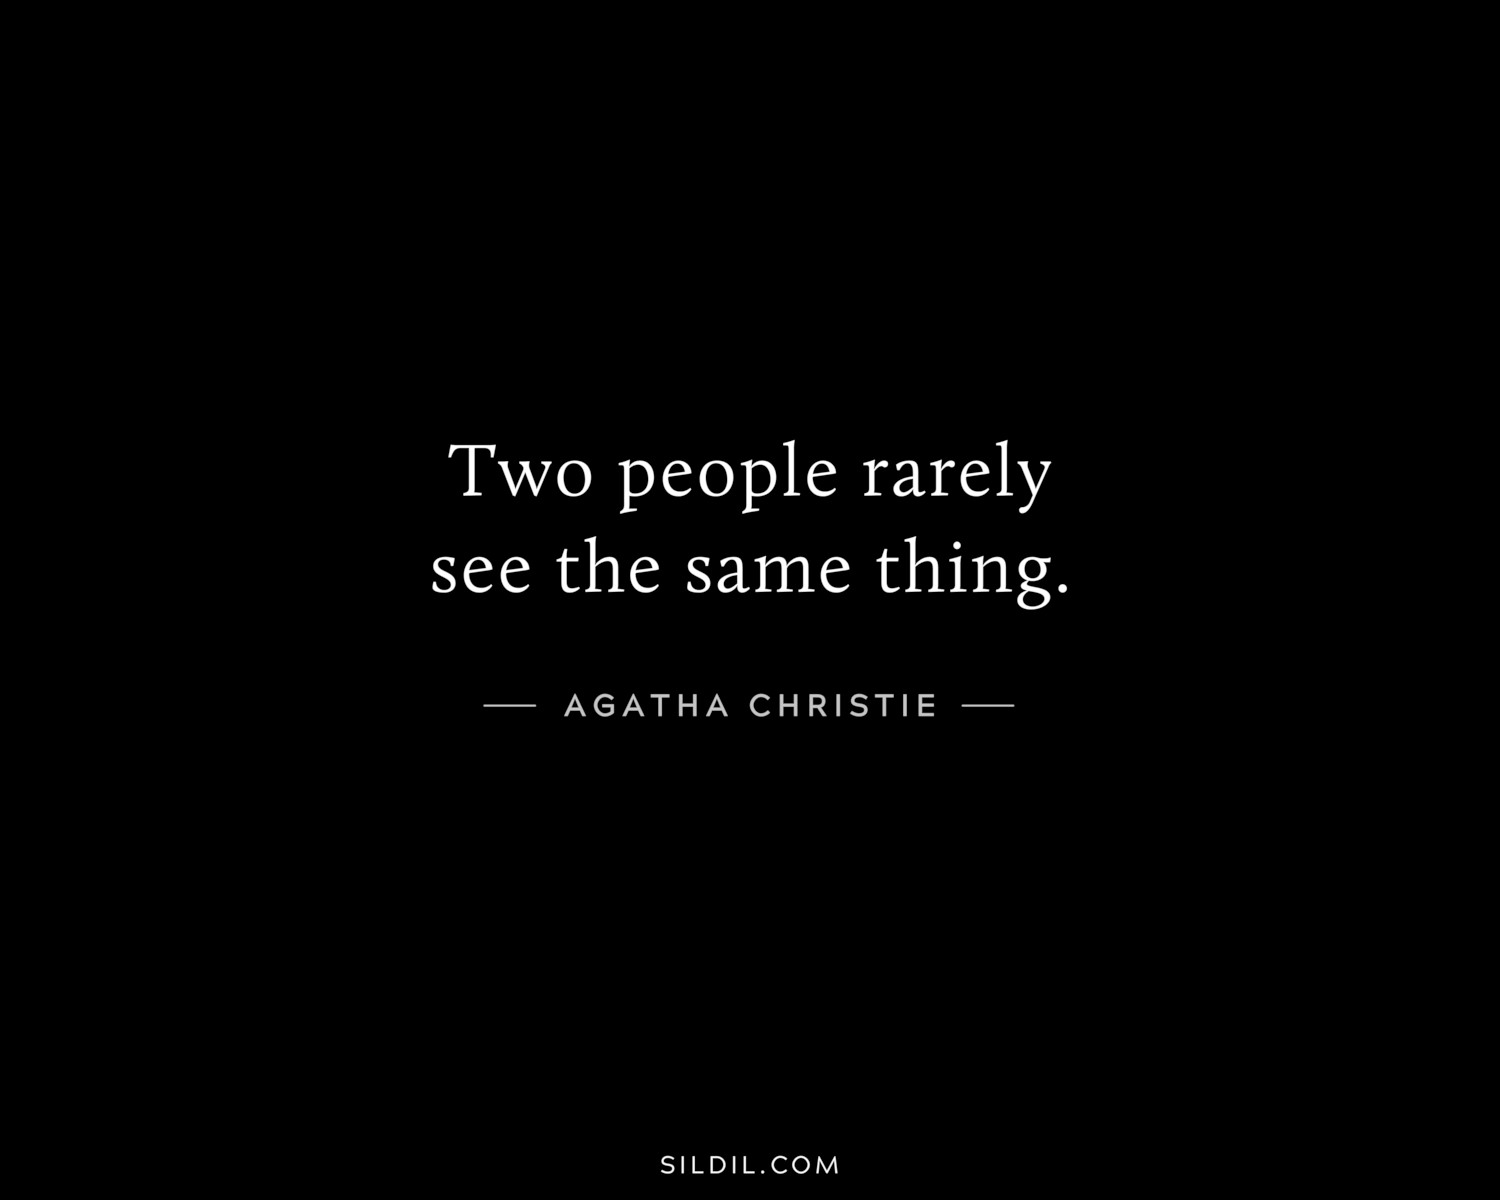 Two people rarely see the same thing.